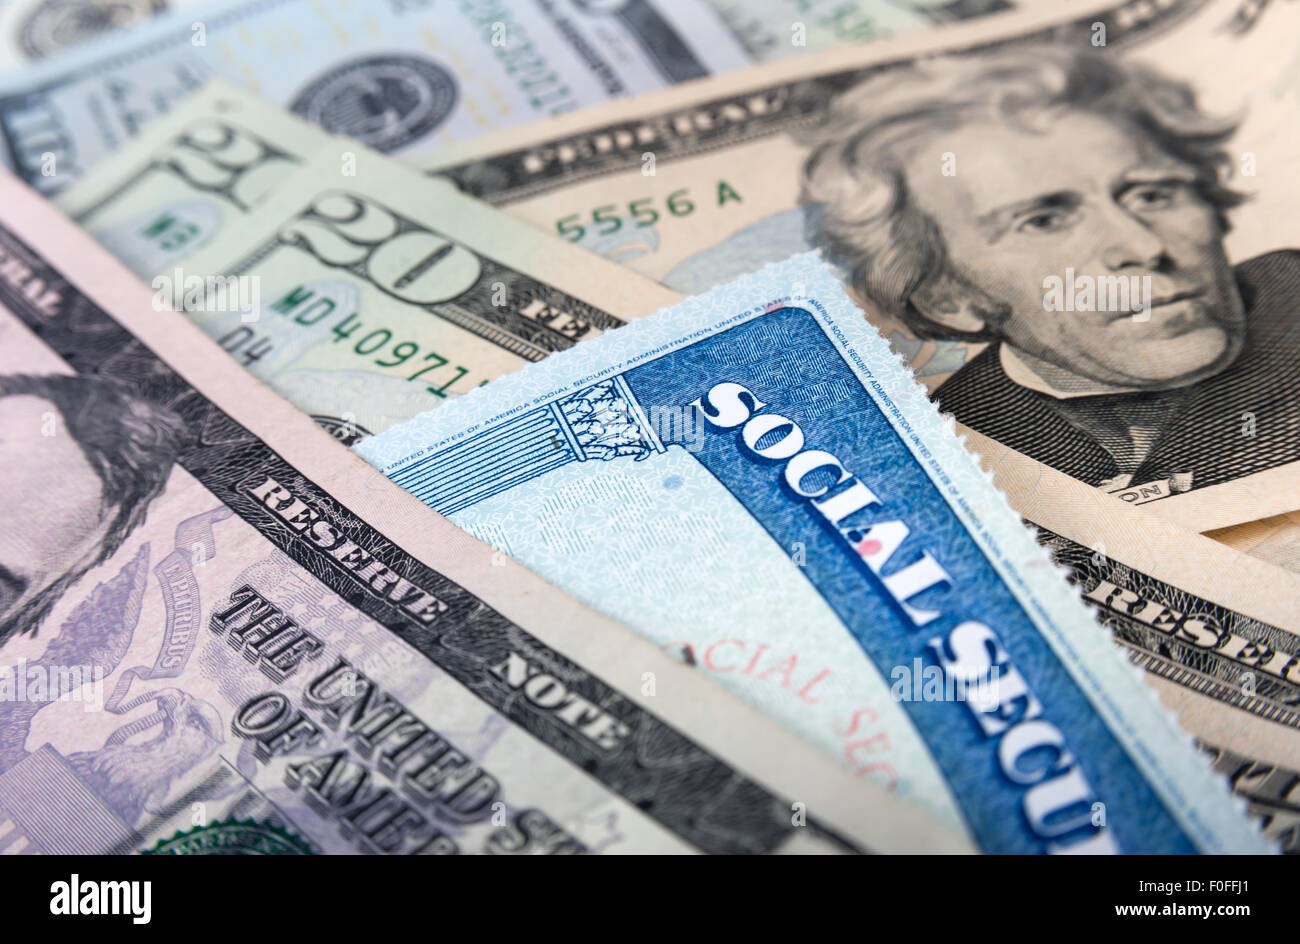 Social security card and American money dollar bills close up concept Stock Photo